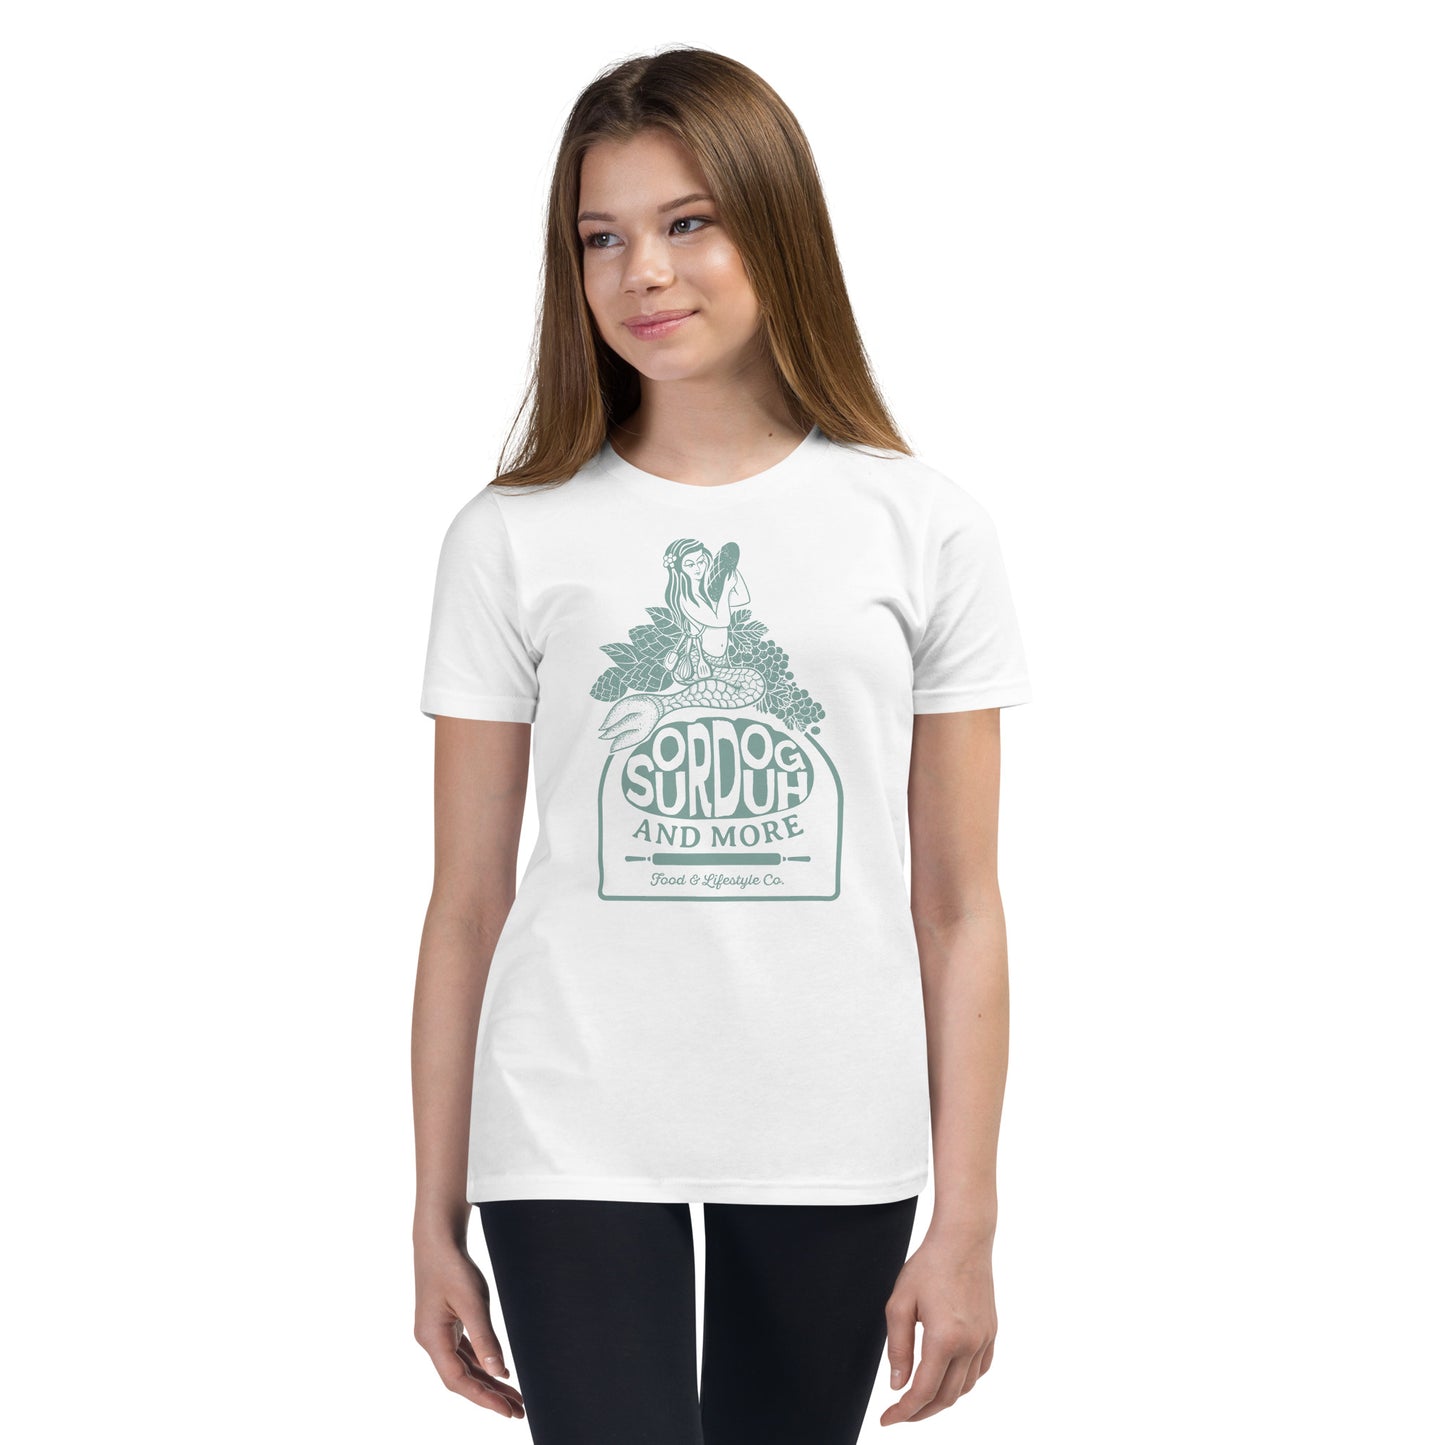 Sourdough and More Customized Youth Short Sleeve T-Shirt